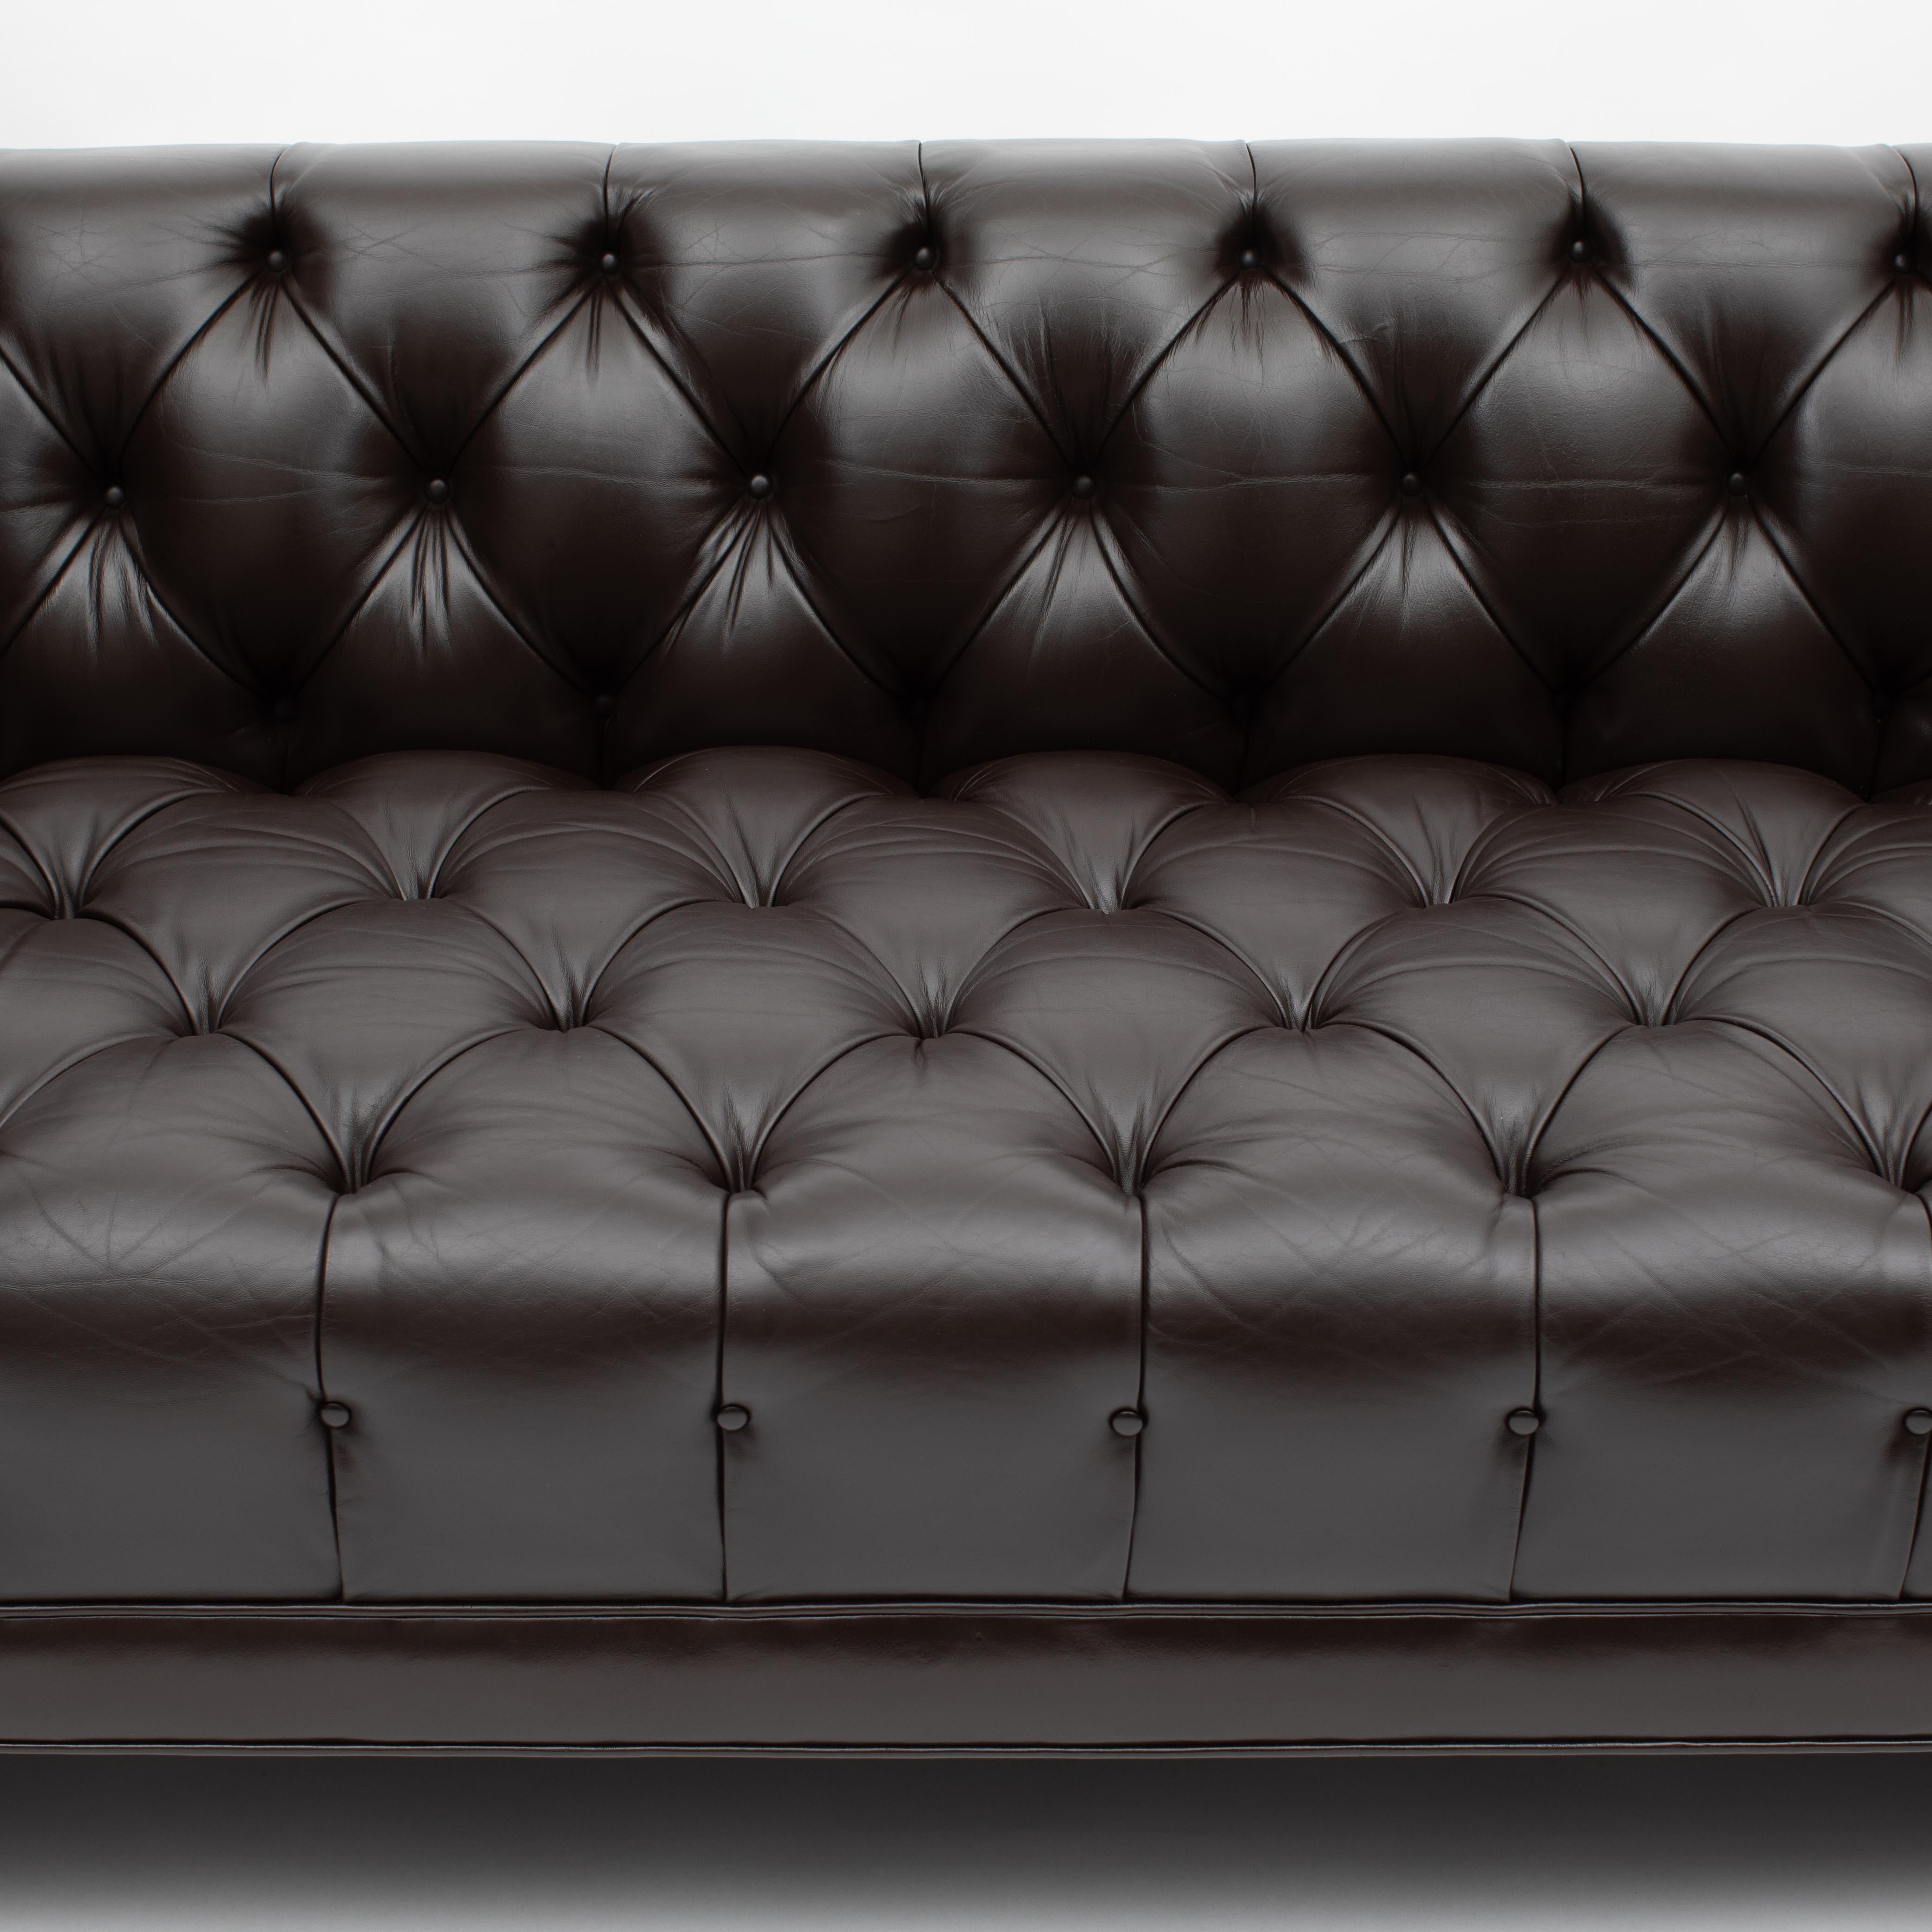 Mid-20th Century Ward Bennett Button-Tufted Leather Sofa for Lehigh Furniture, circa 1960s For Sale